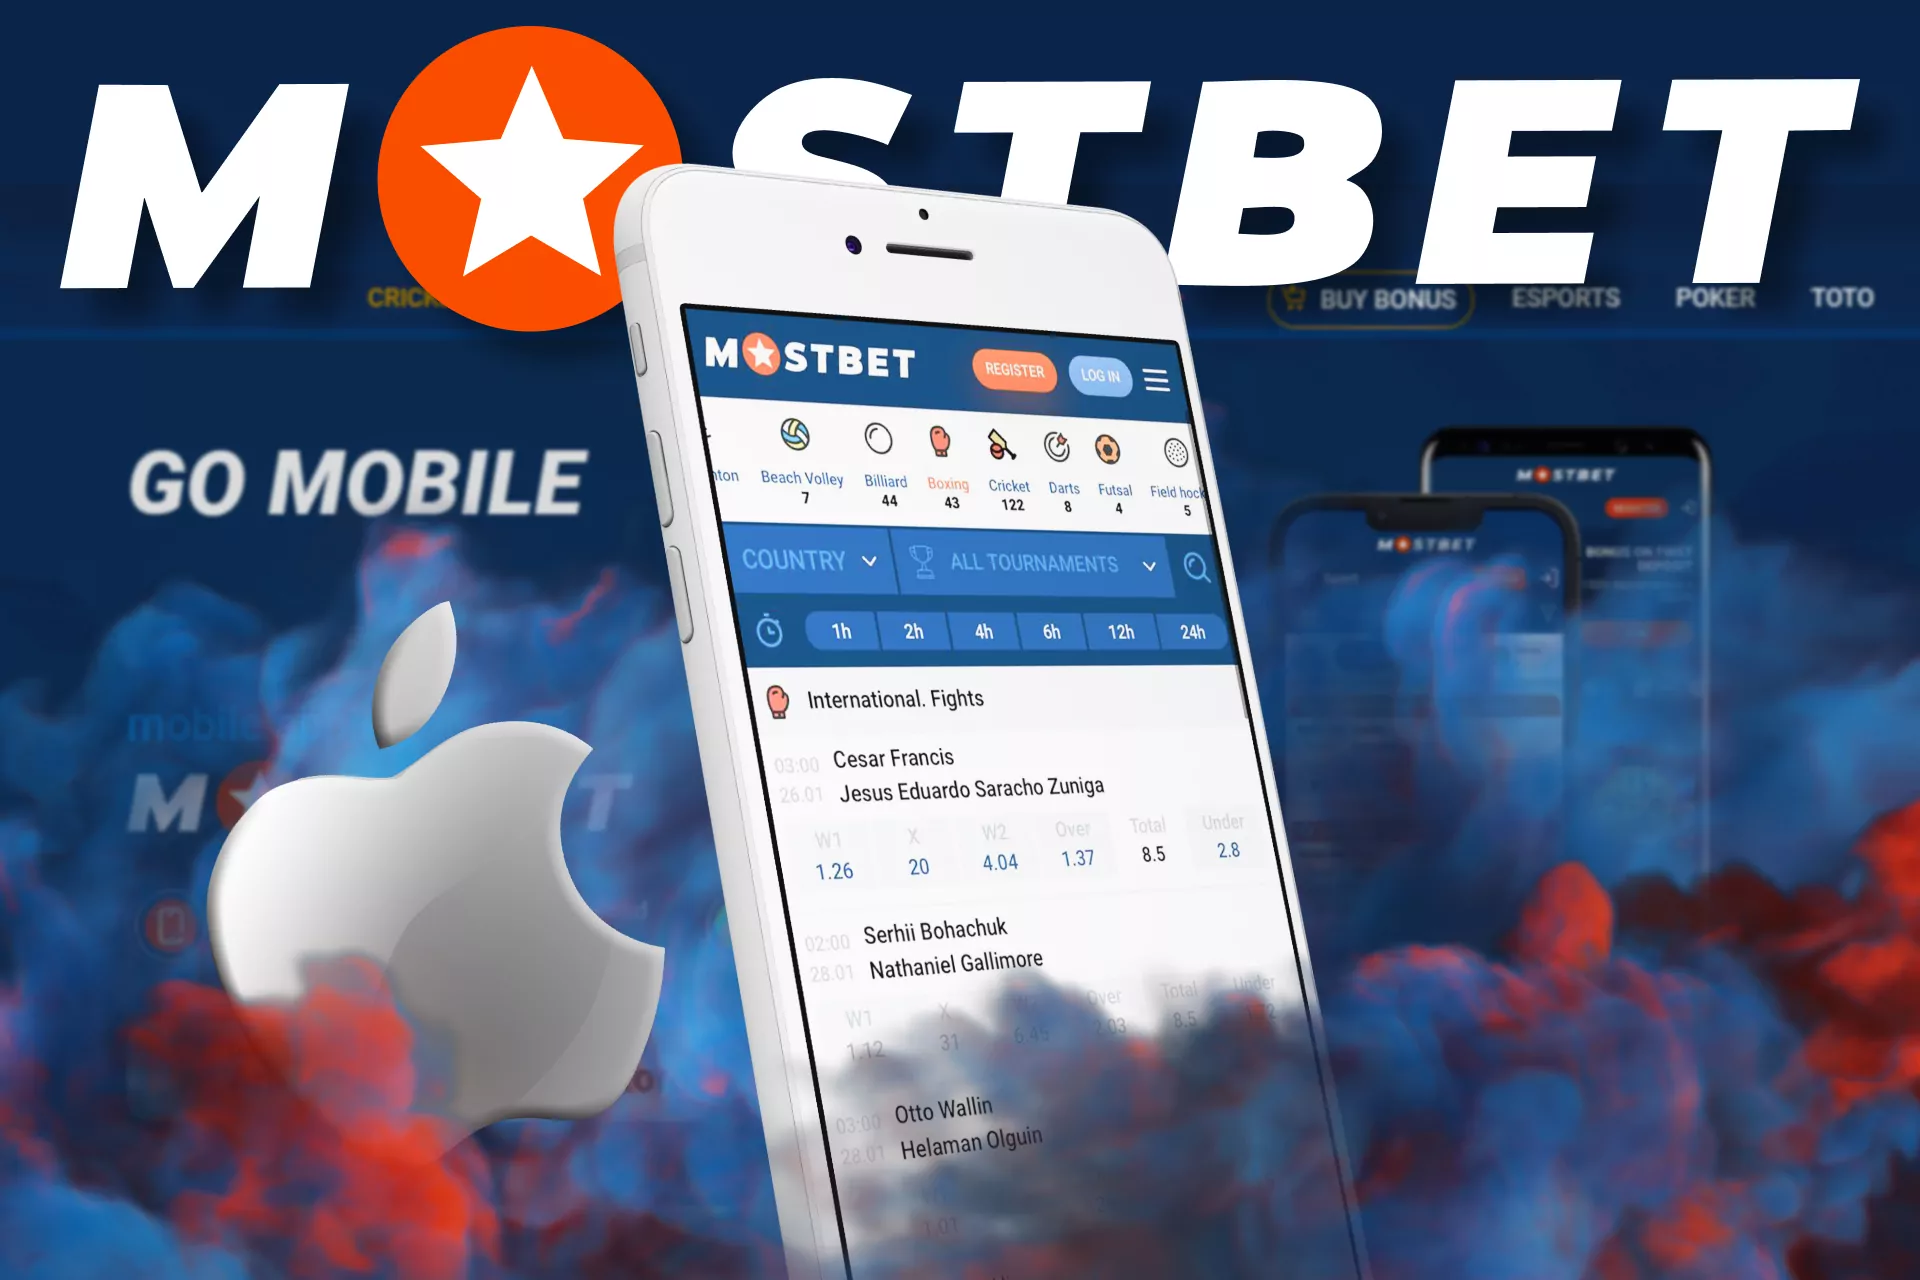 The Mostbet app for iOS devices is convenient for betting on boxing.